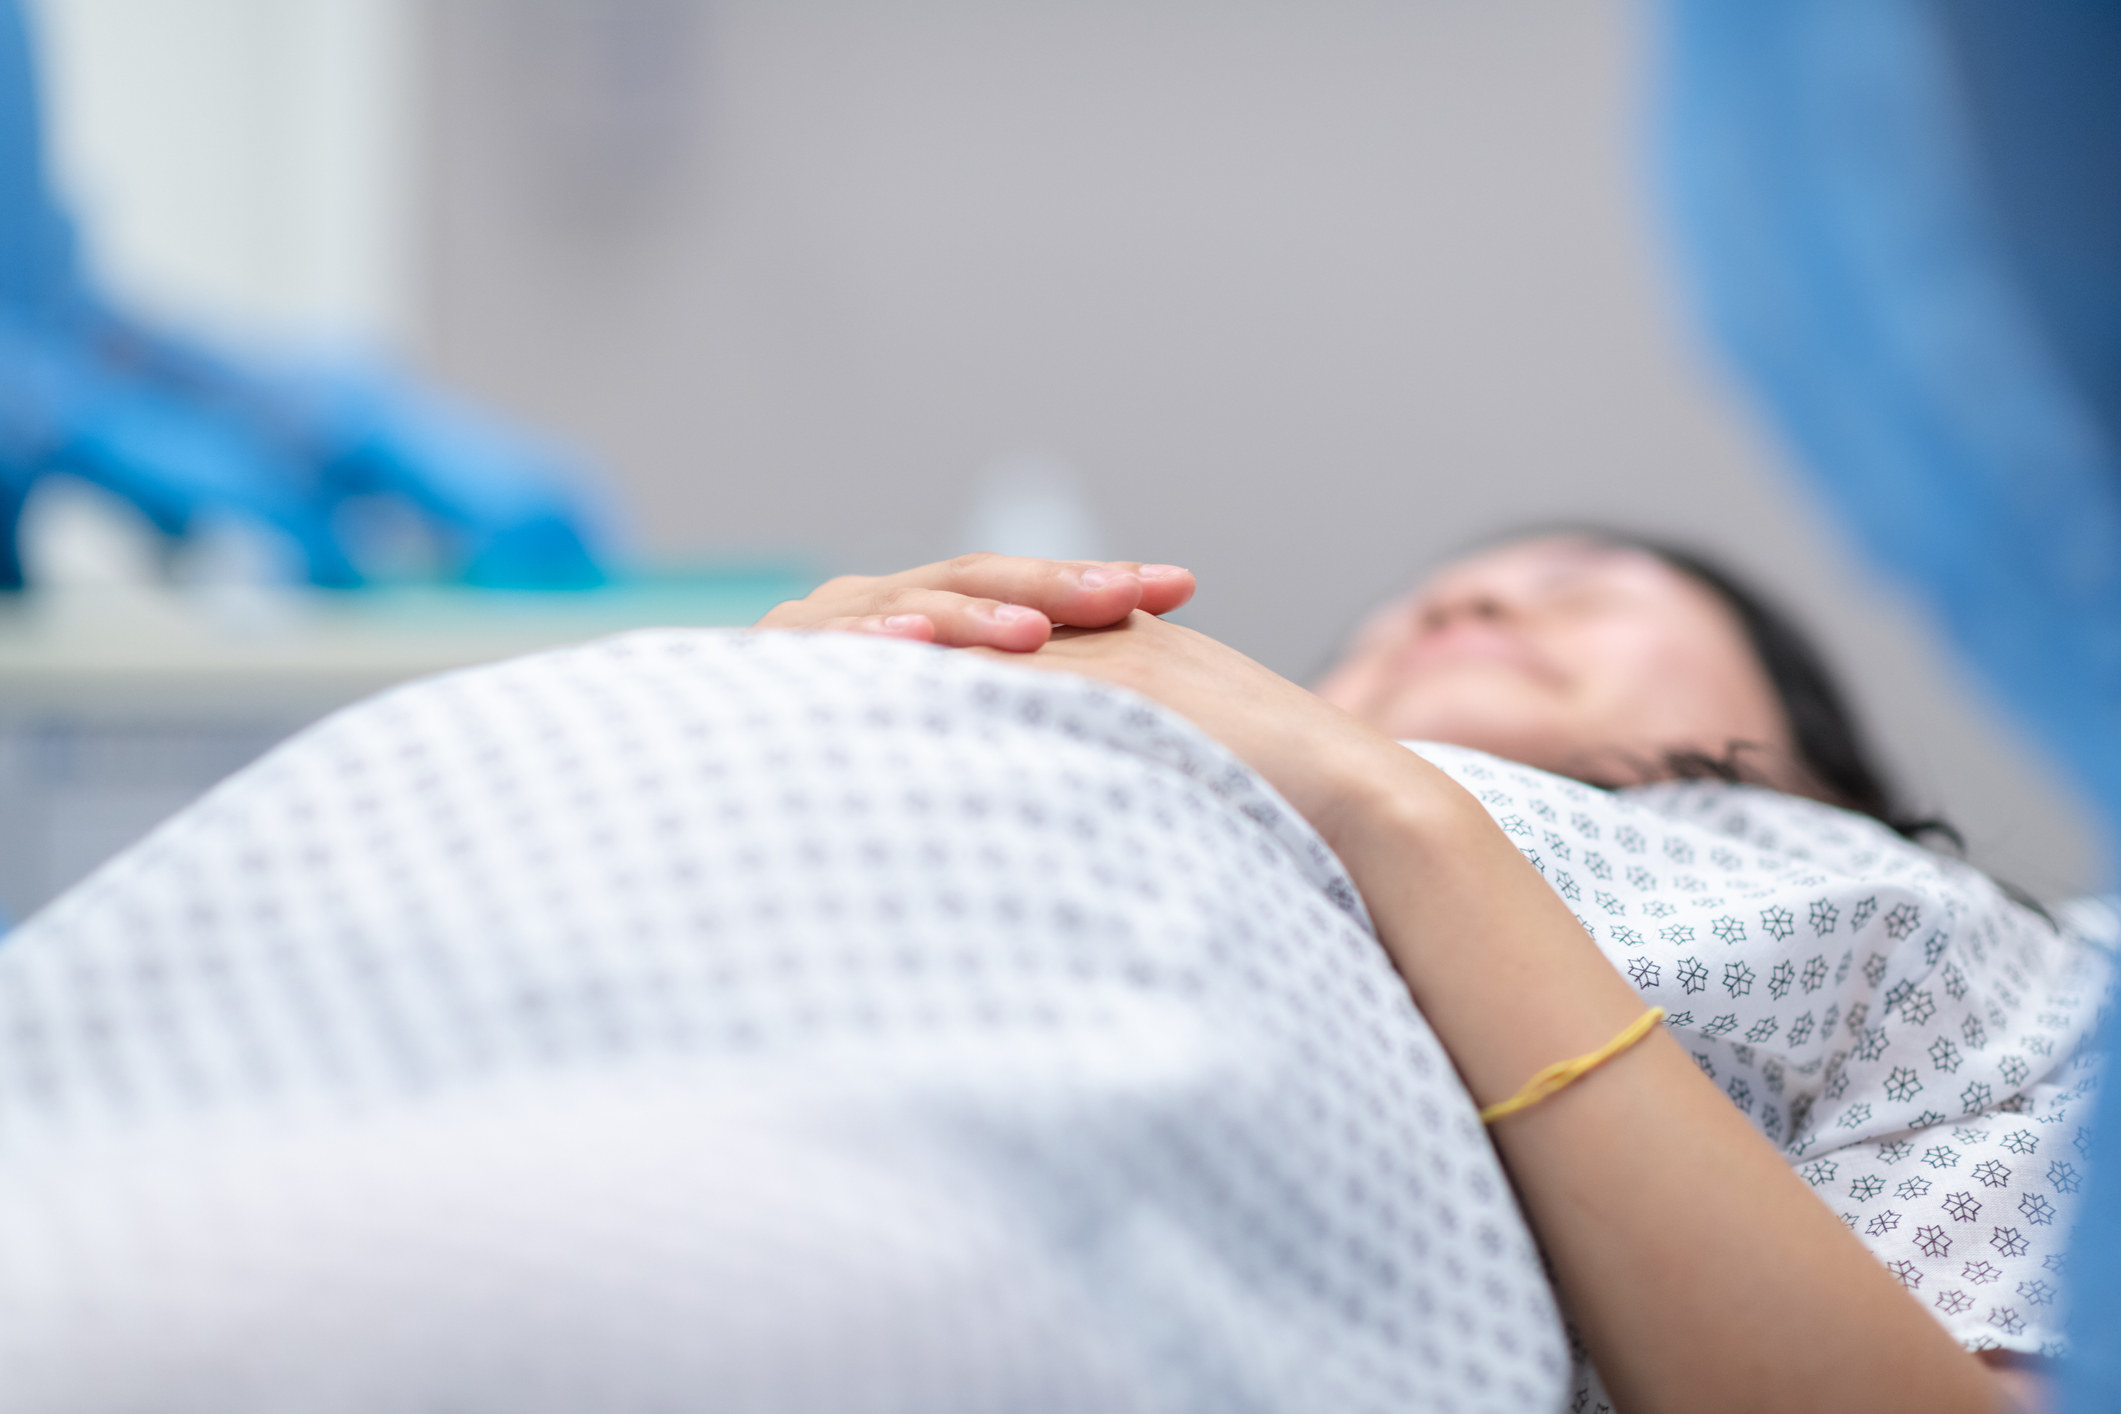 A pregnant person lies on an operating table